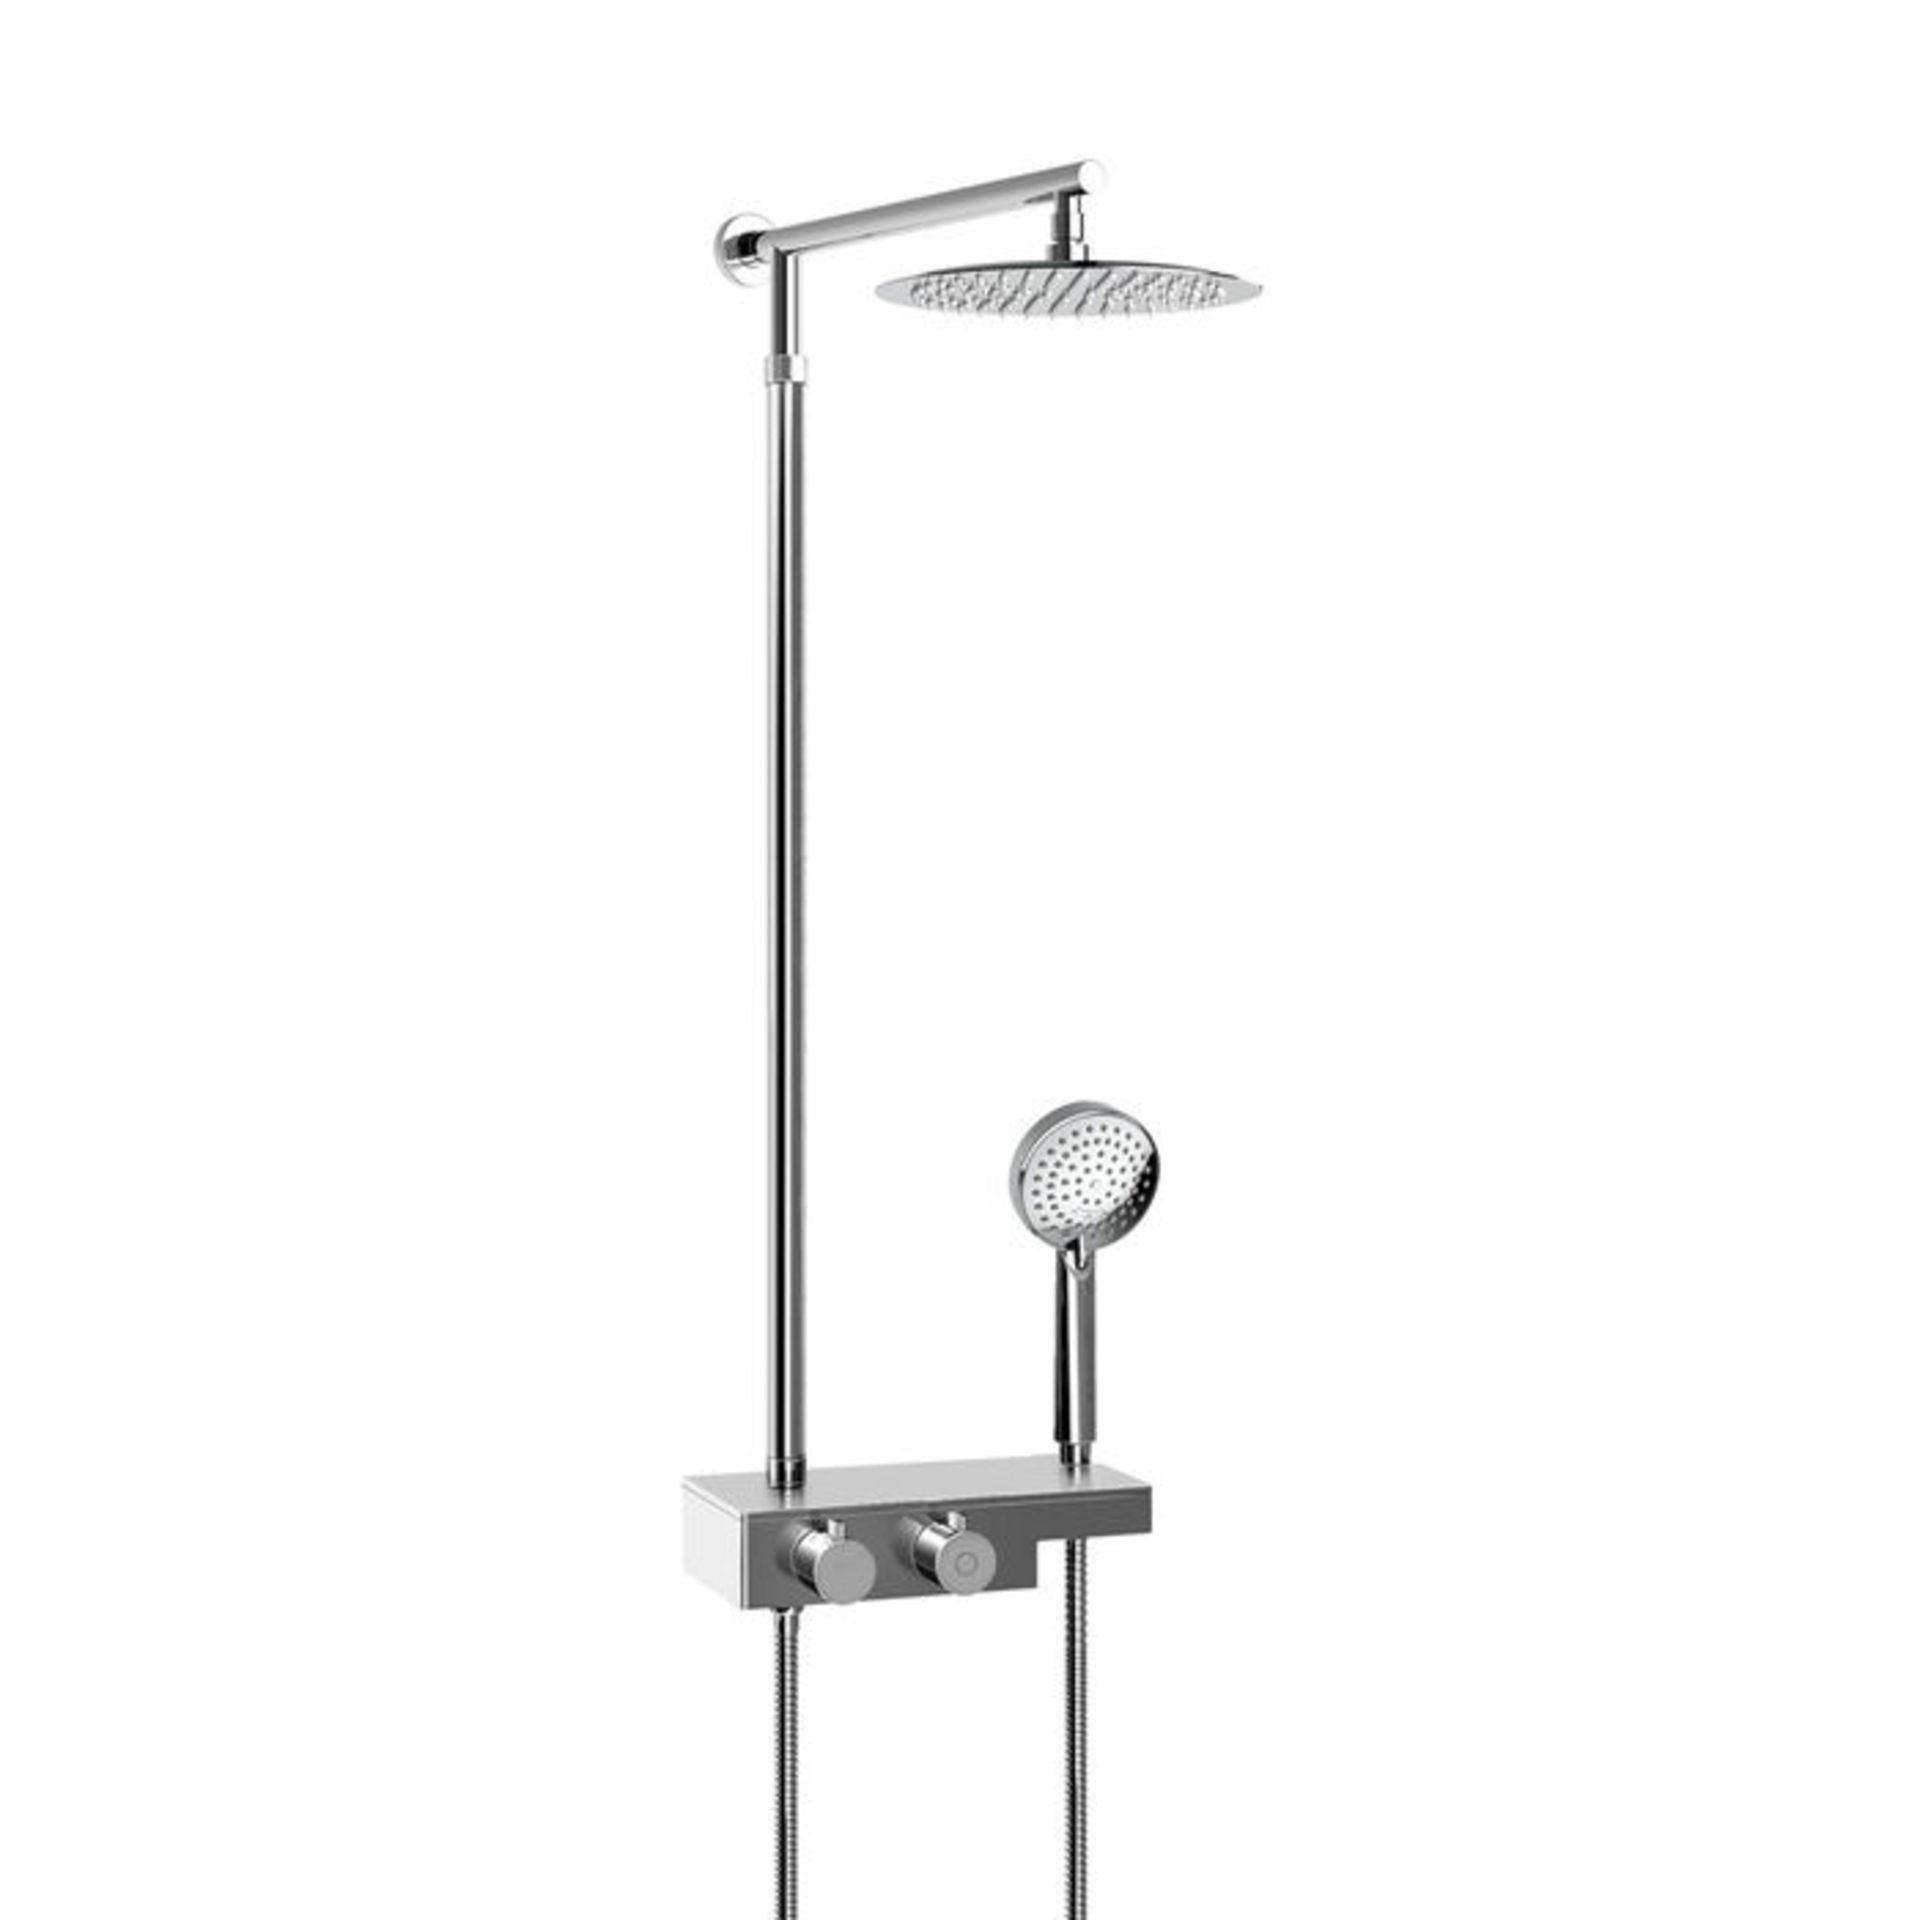 (AA103) Round Exposed Thermostatic Mixer Shower Kit & Large Head. RRP £349.99. Cool to touch s... - Image 3 of 3